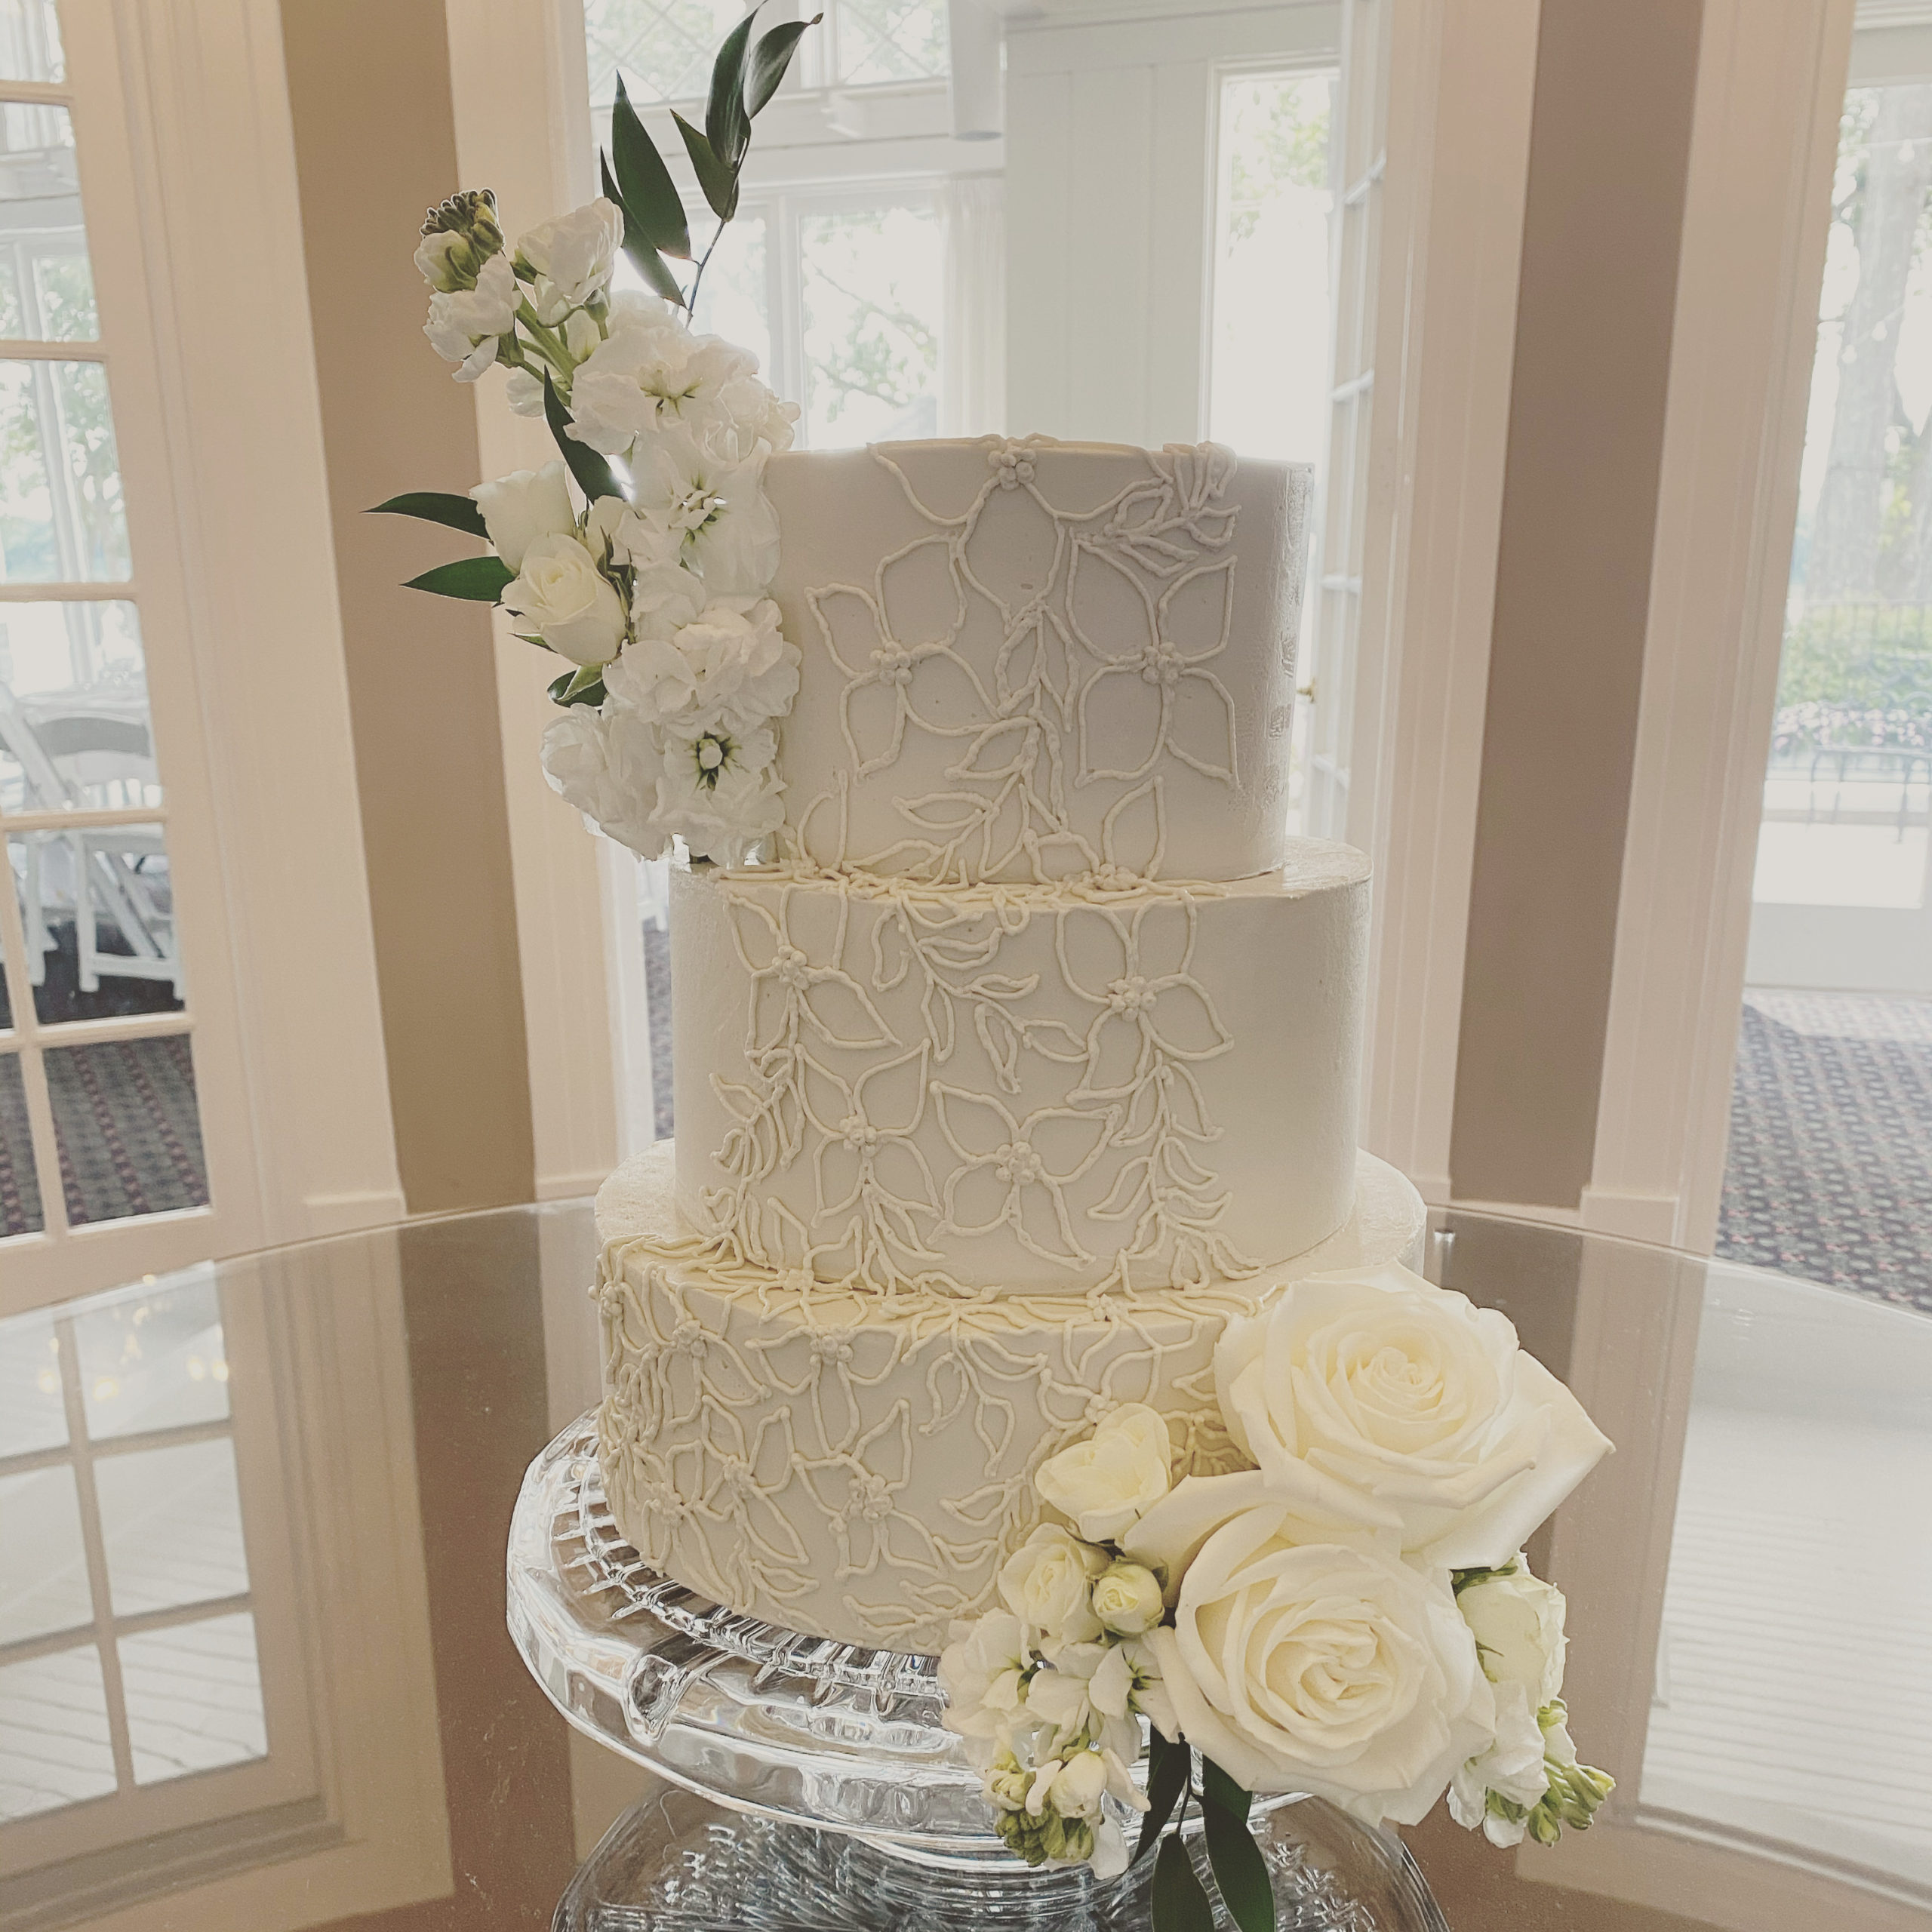 A beautiful 3-tier custom wedding cake with intricate piping and live flowers from Village Patisserie in Toledo, Ohio